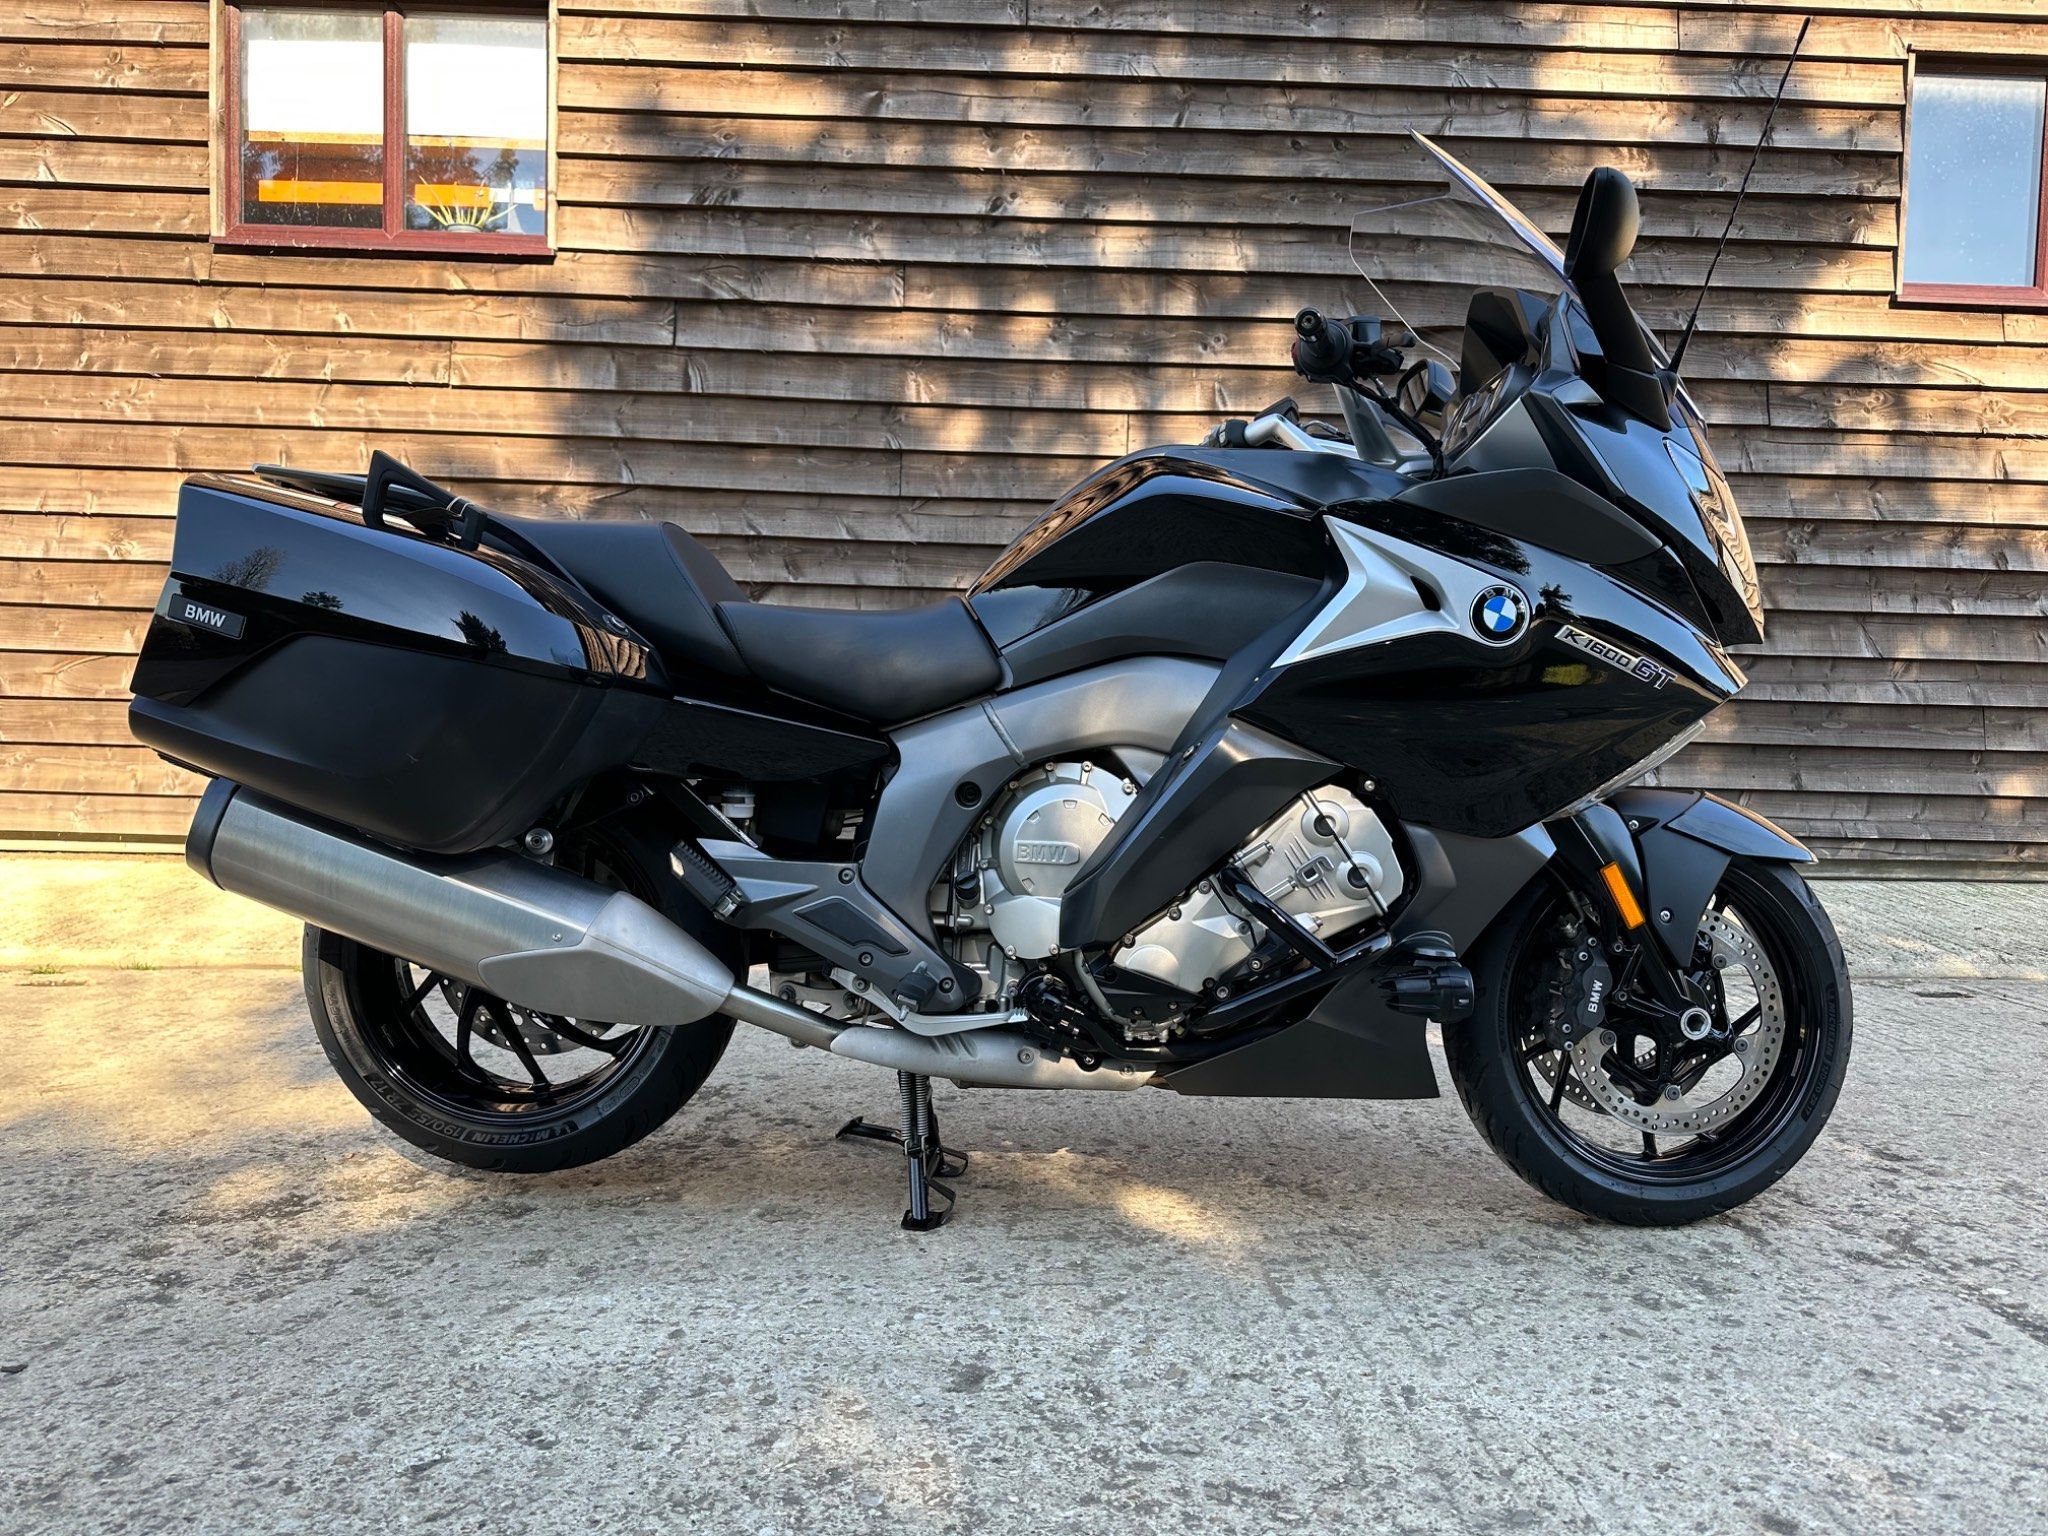 2019 BMW K1600GT 1650 GT SE ABS From £243.72 per month 